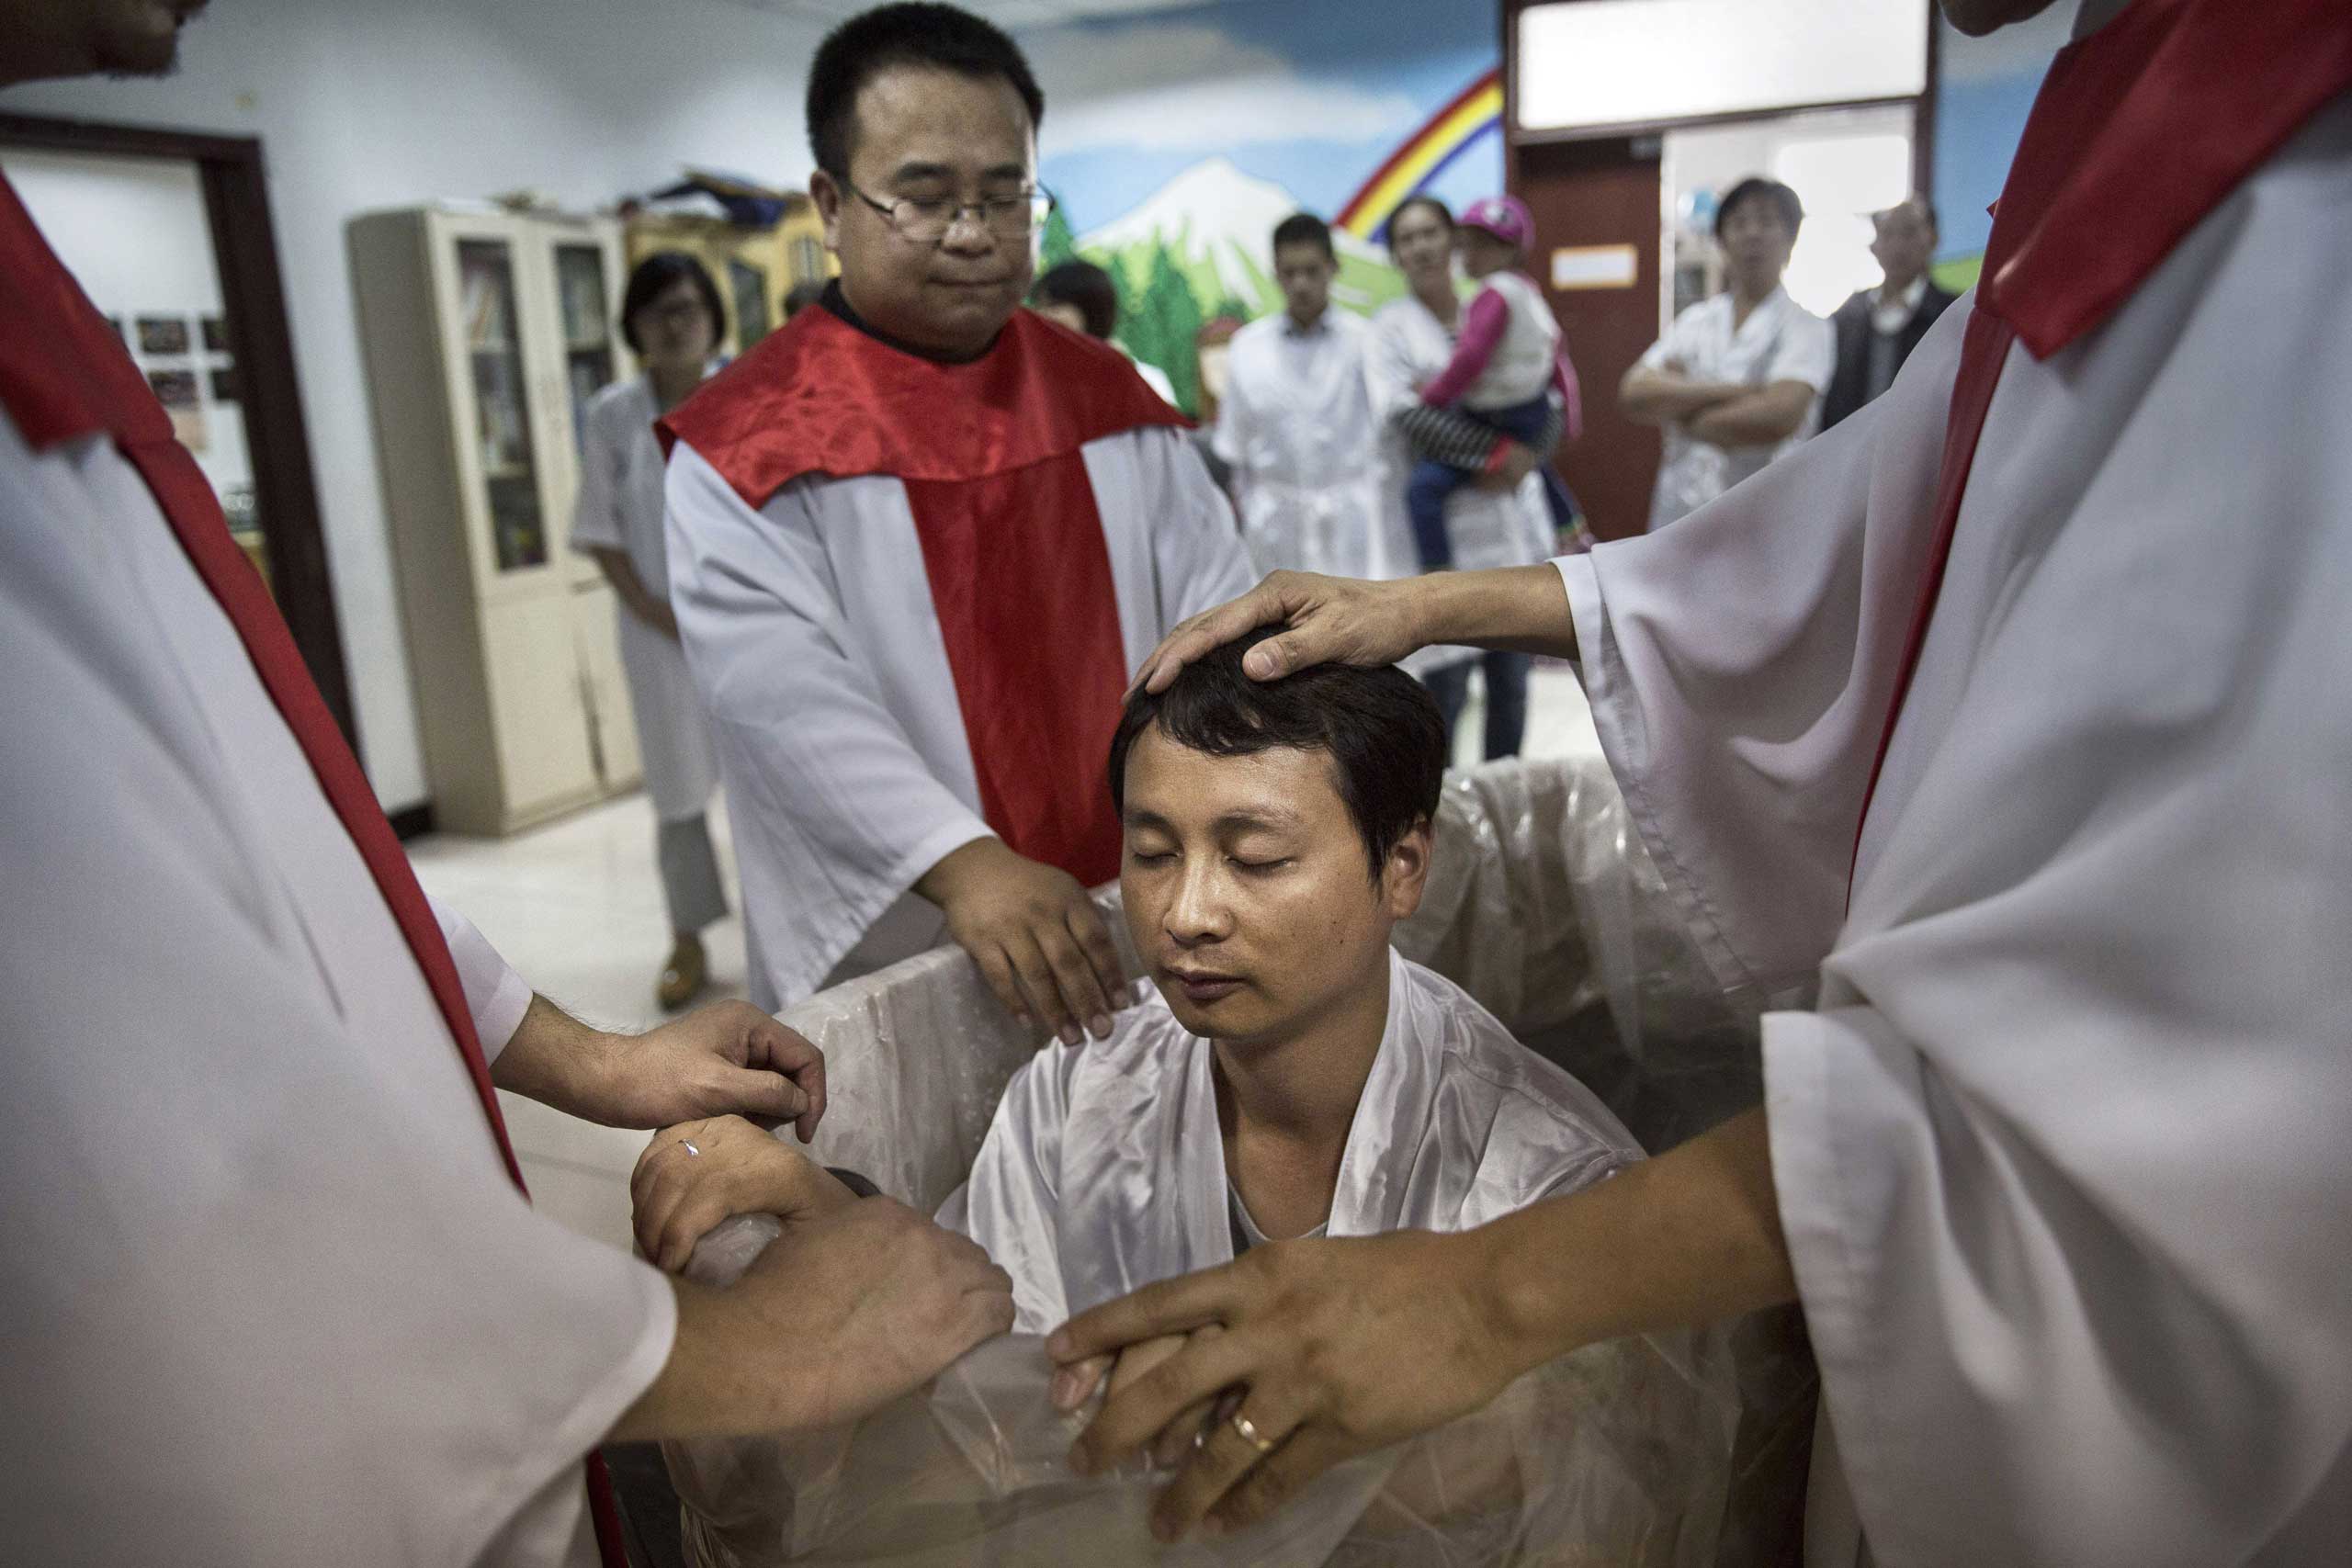 A new Christian man sits in a small tub of water as he is baptized during a ceremony.